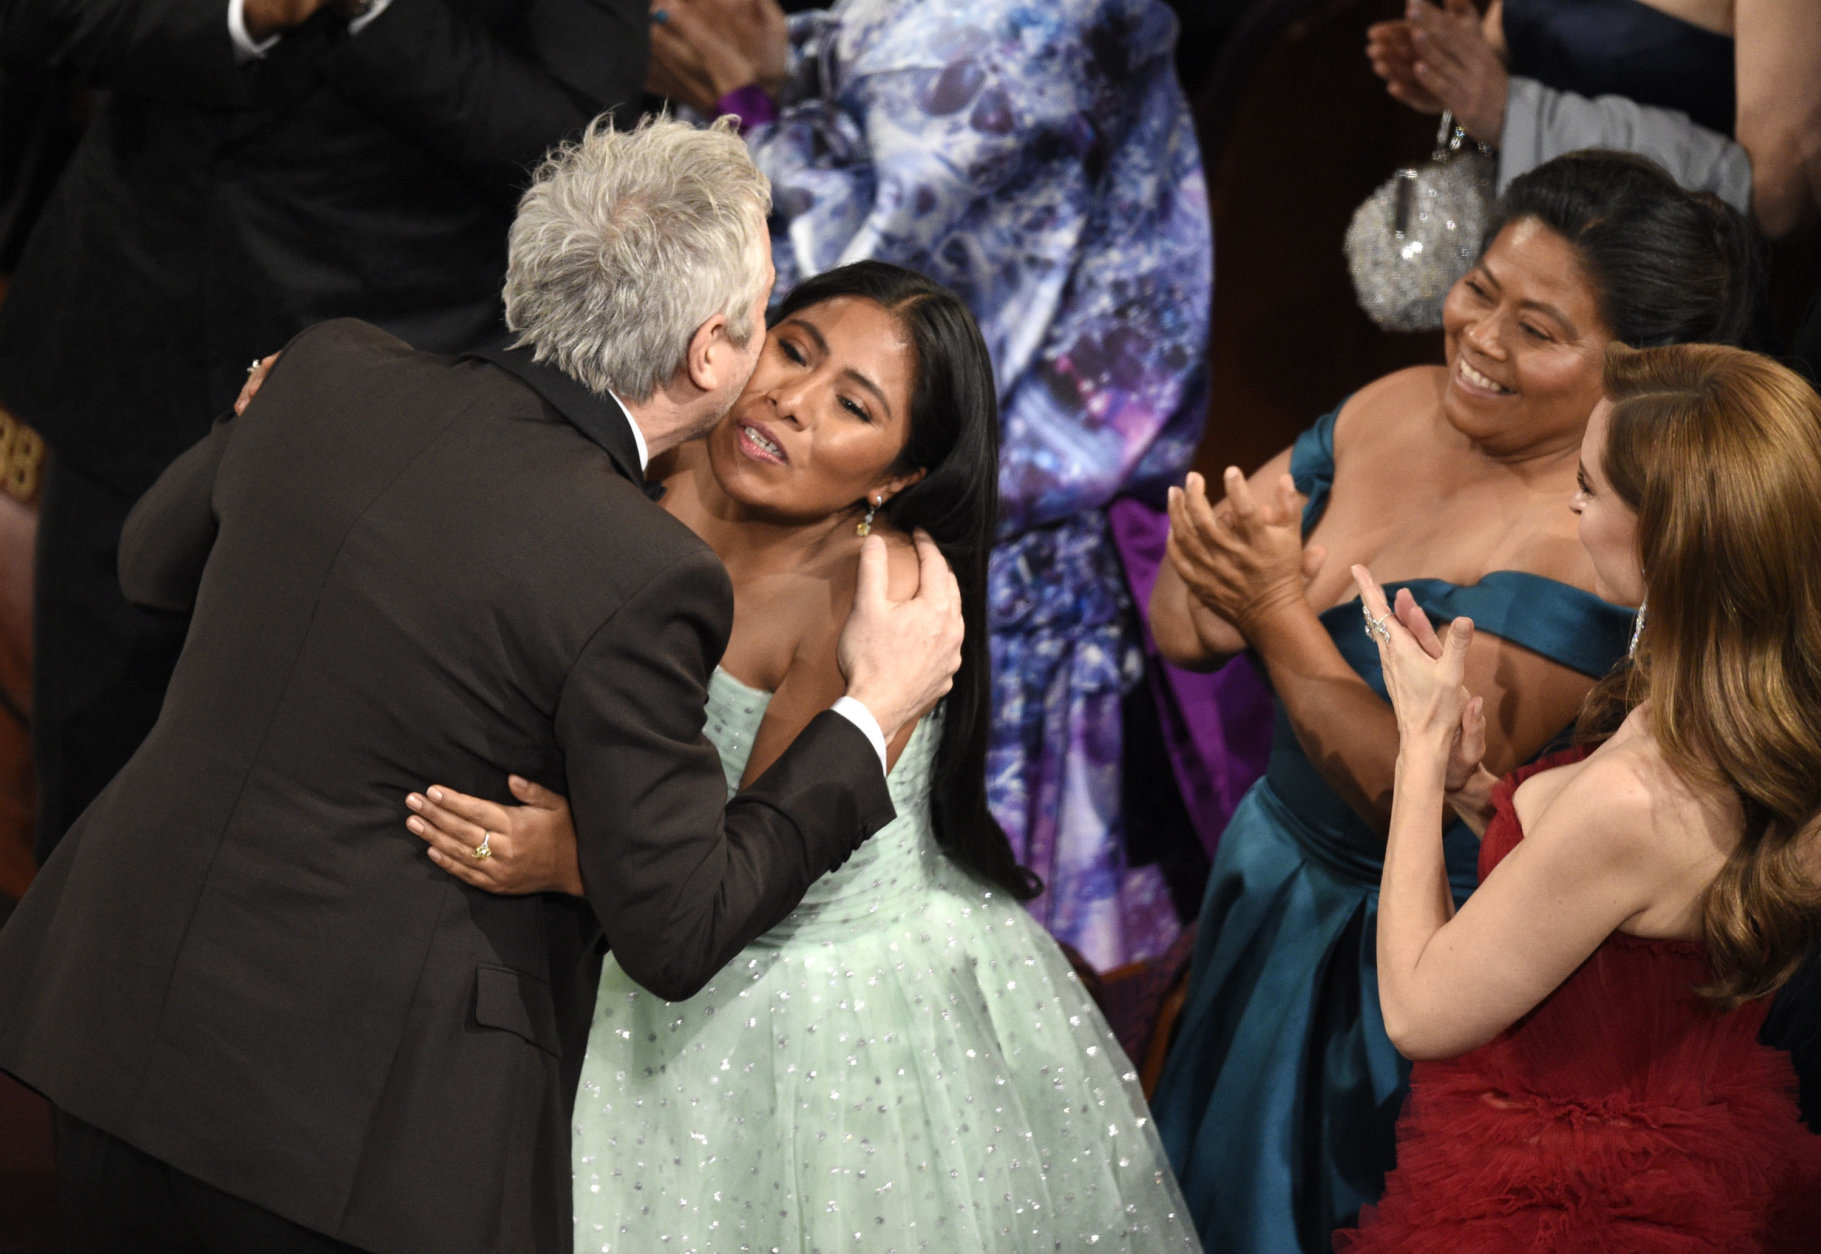 Yalitza Aparicio, right, congratulates Alfonso Cuaron in the audience as he is announced the winner of the award for best cinematography for "Roma" at the Oscars on Sunday, Feb. 24, 2019, at the Dolby Theatre in Los Angeles. (Photo by Chris Pizzello/Invision/AP)